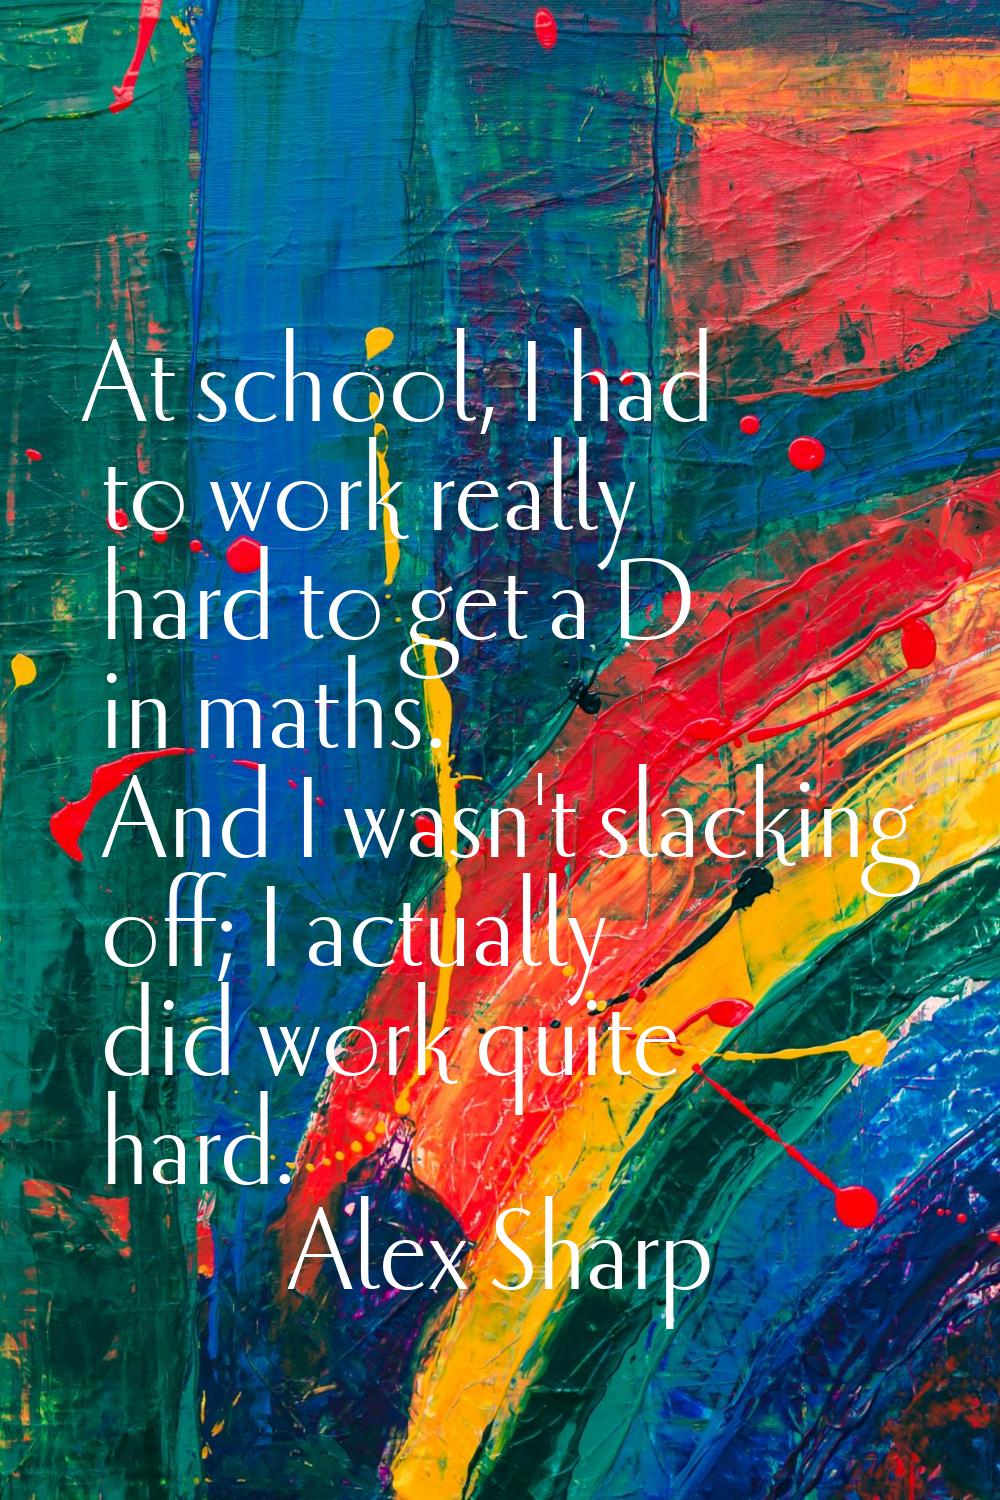 At school, I had to work really hard to get a D in maths. And I wasn't slacking off; I actually did